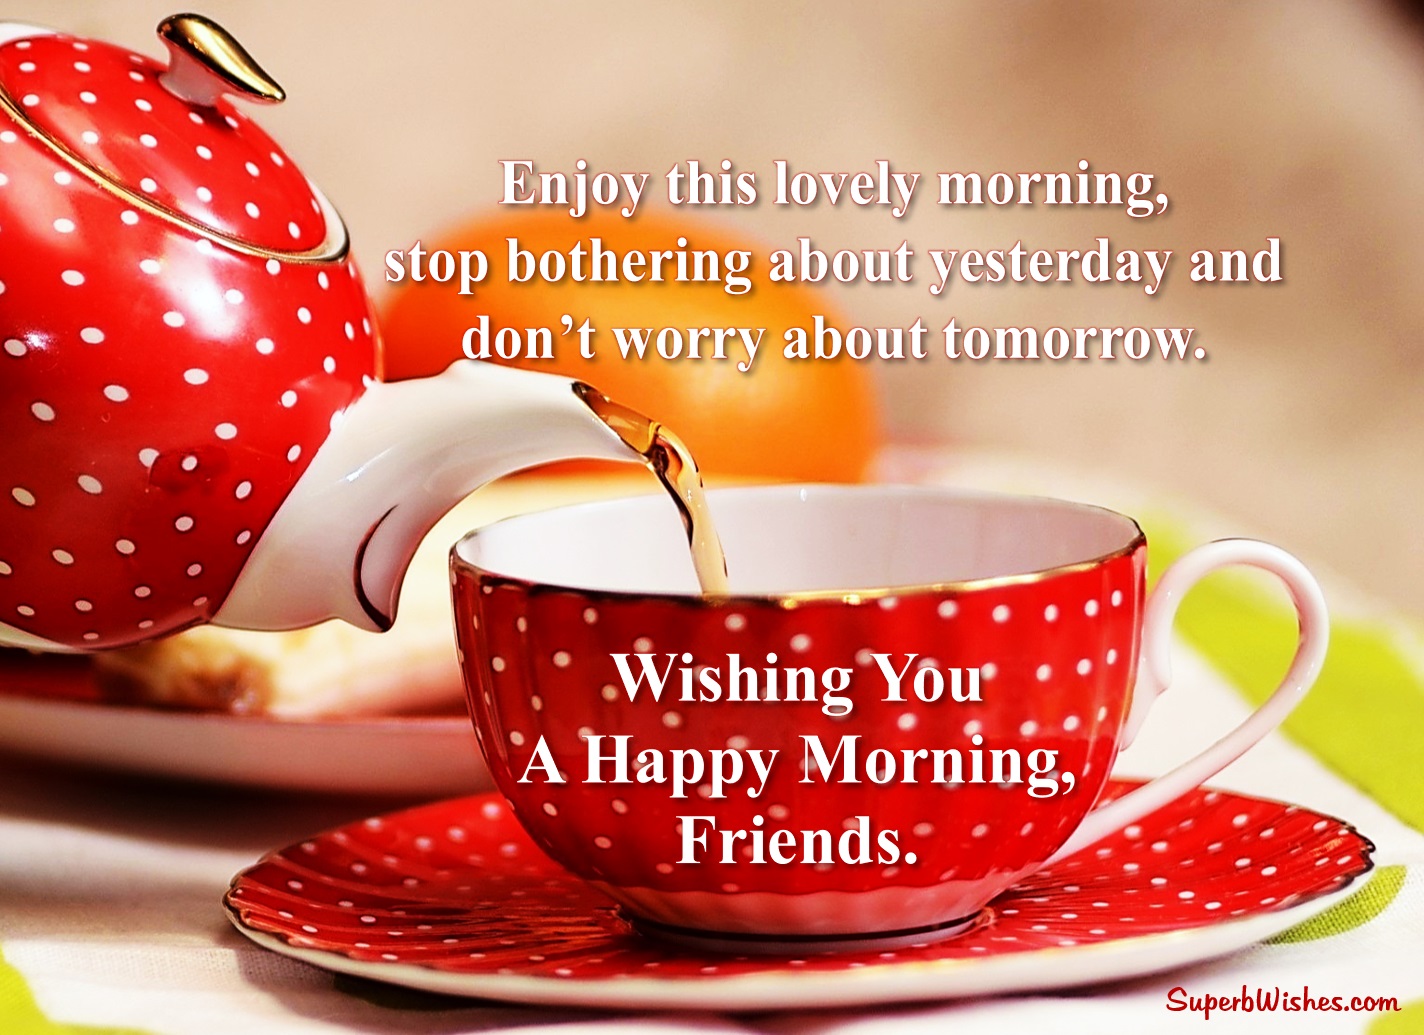 Good Morning Wishes For Friends Images - Stop Bothering | SuperbWishes